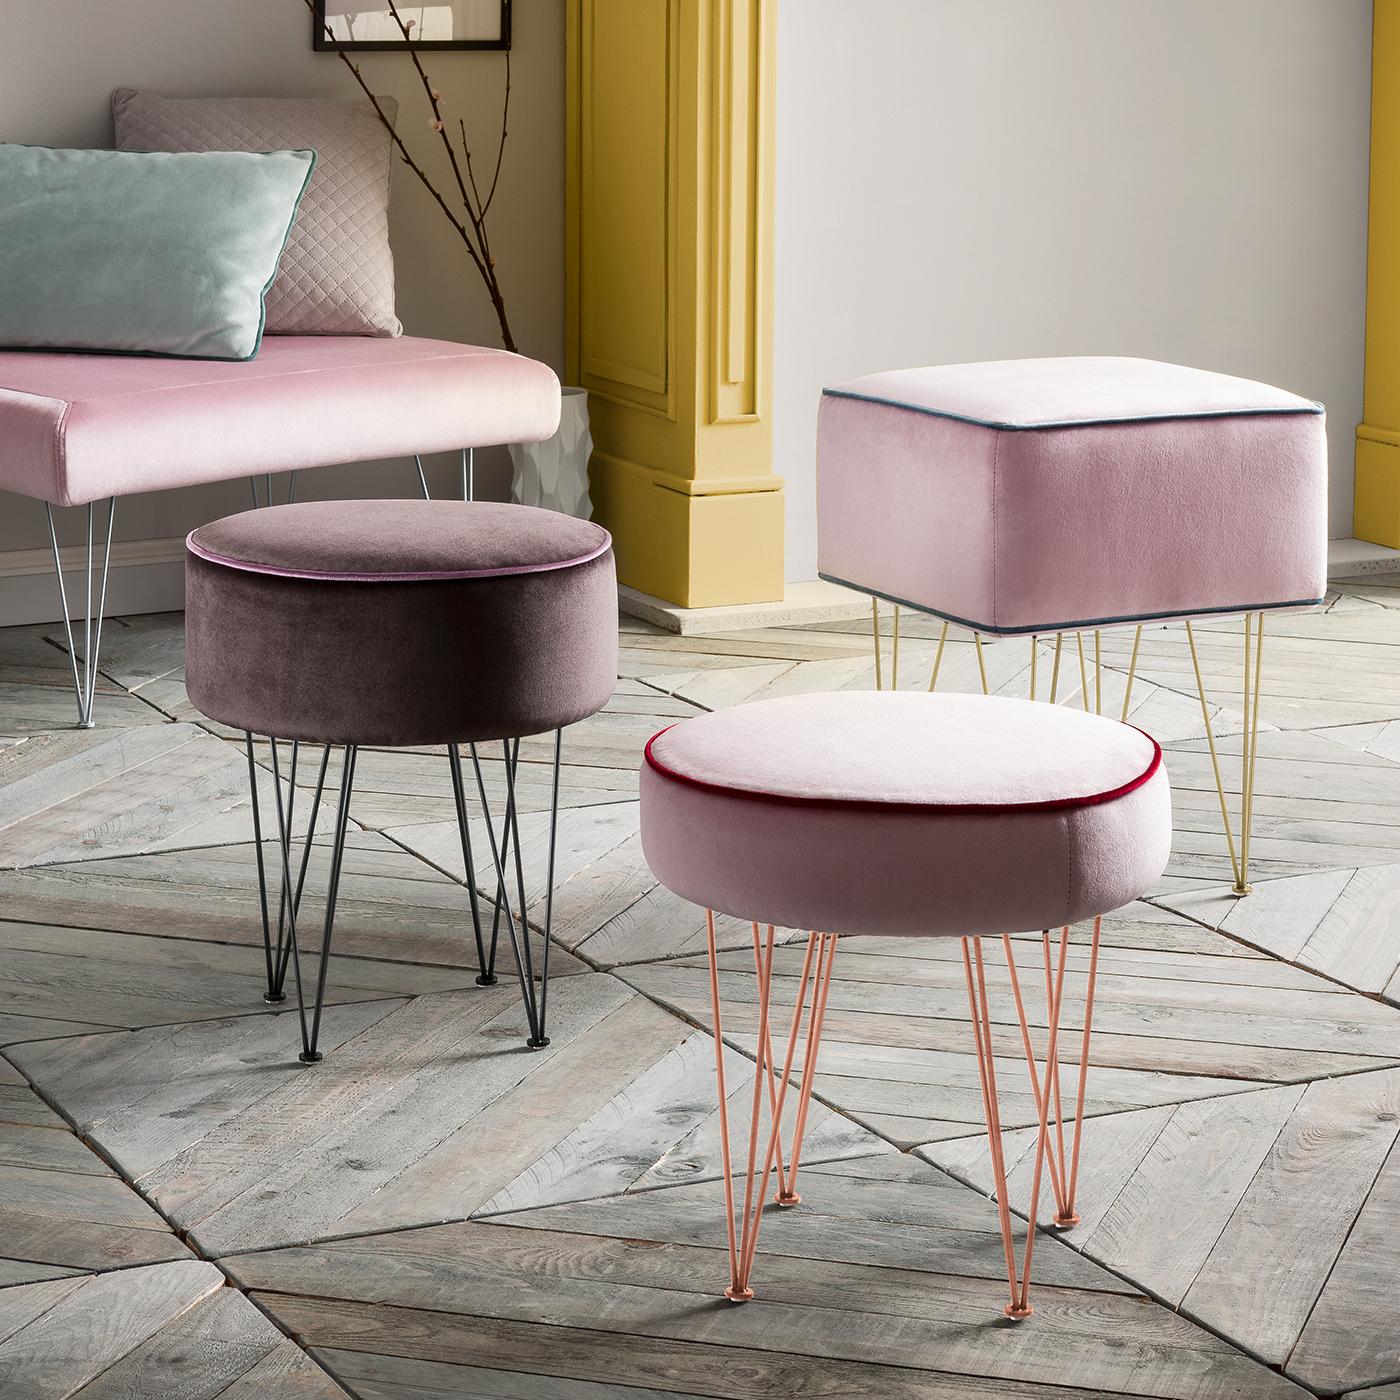 Combining refined materials with simple geometric lines, this alluring pouf of the Pills Collection will suit a modern interior decor. A bold circular top defines the elegant silhouette, crafted of fir, pine and poplar plywood padded with